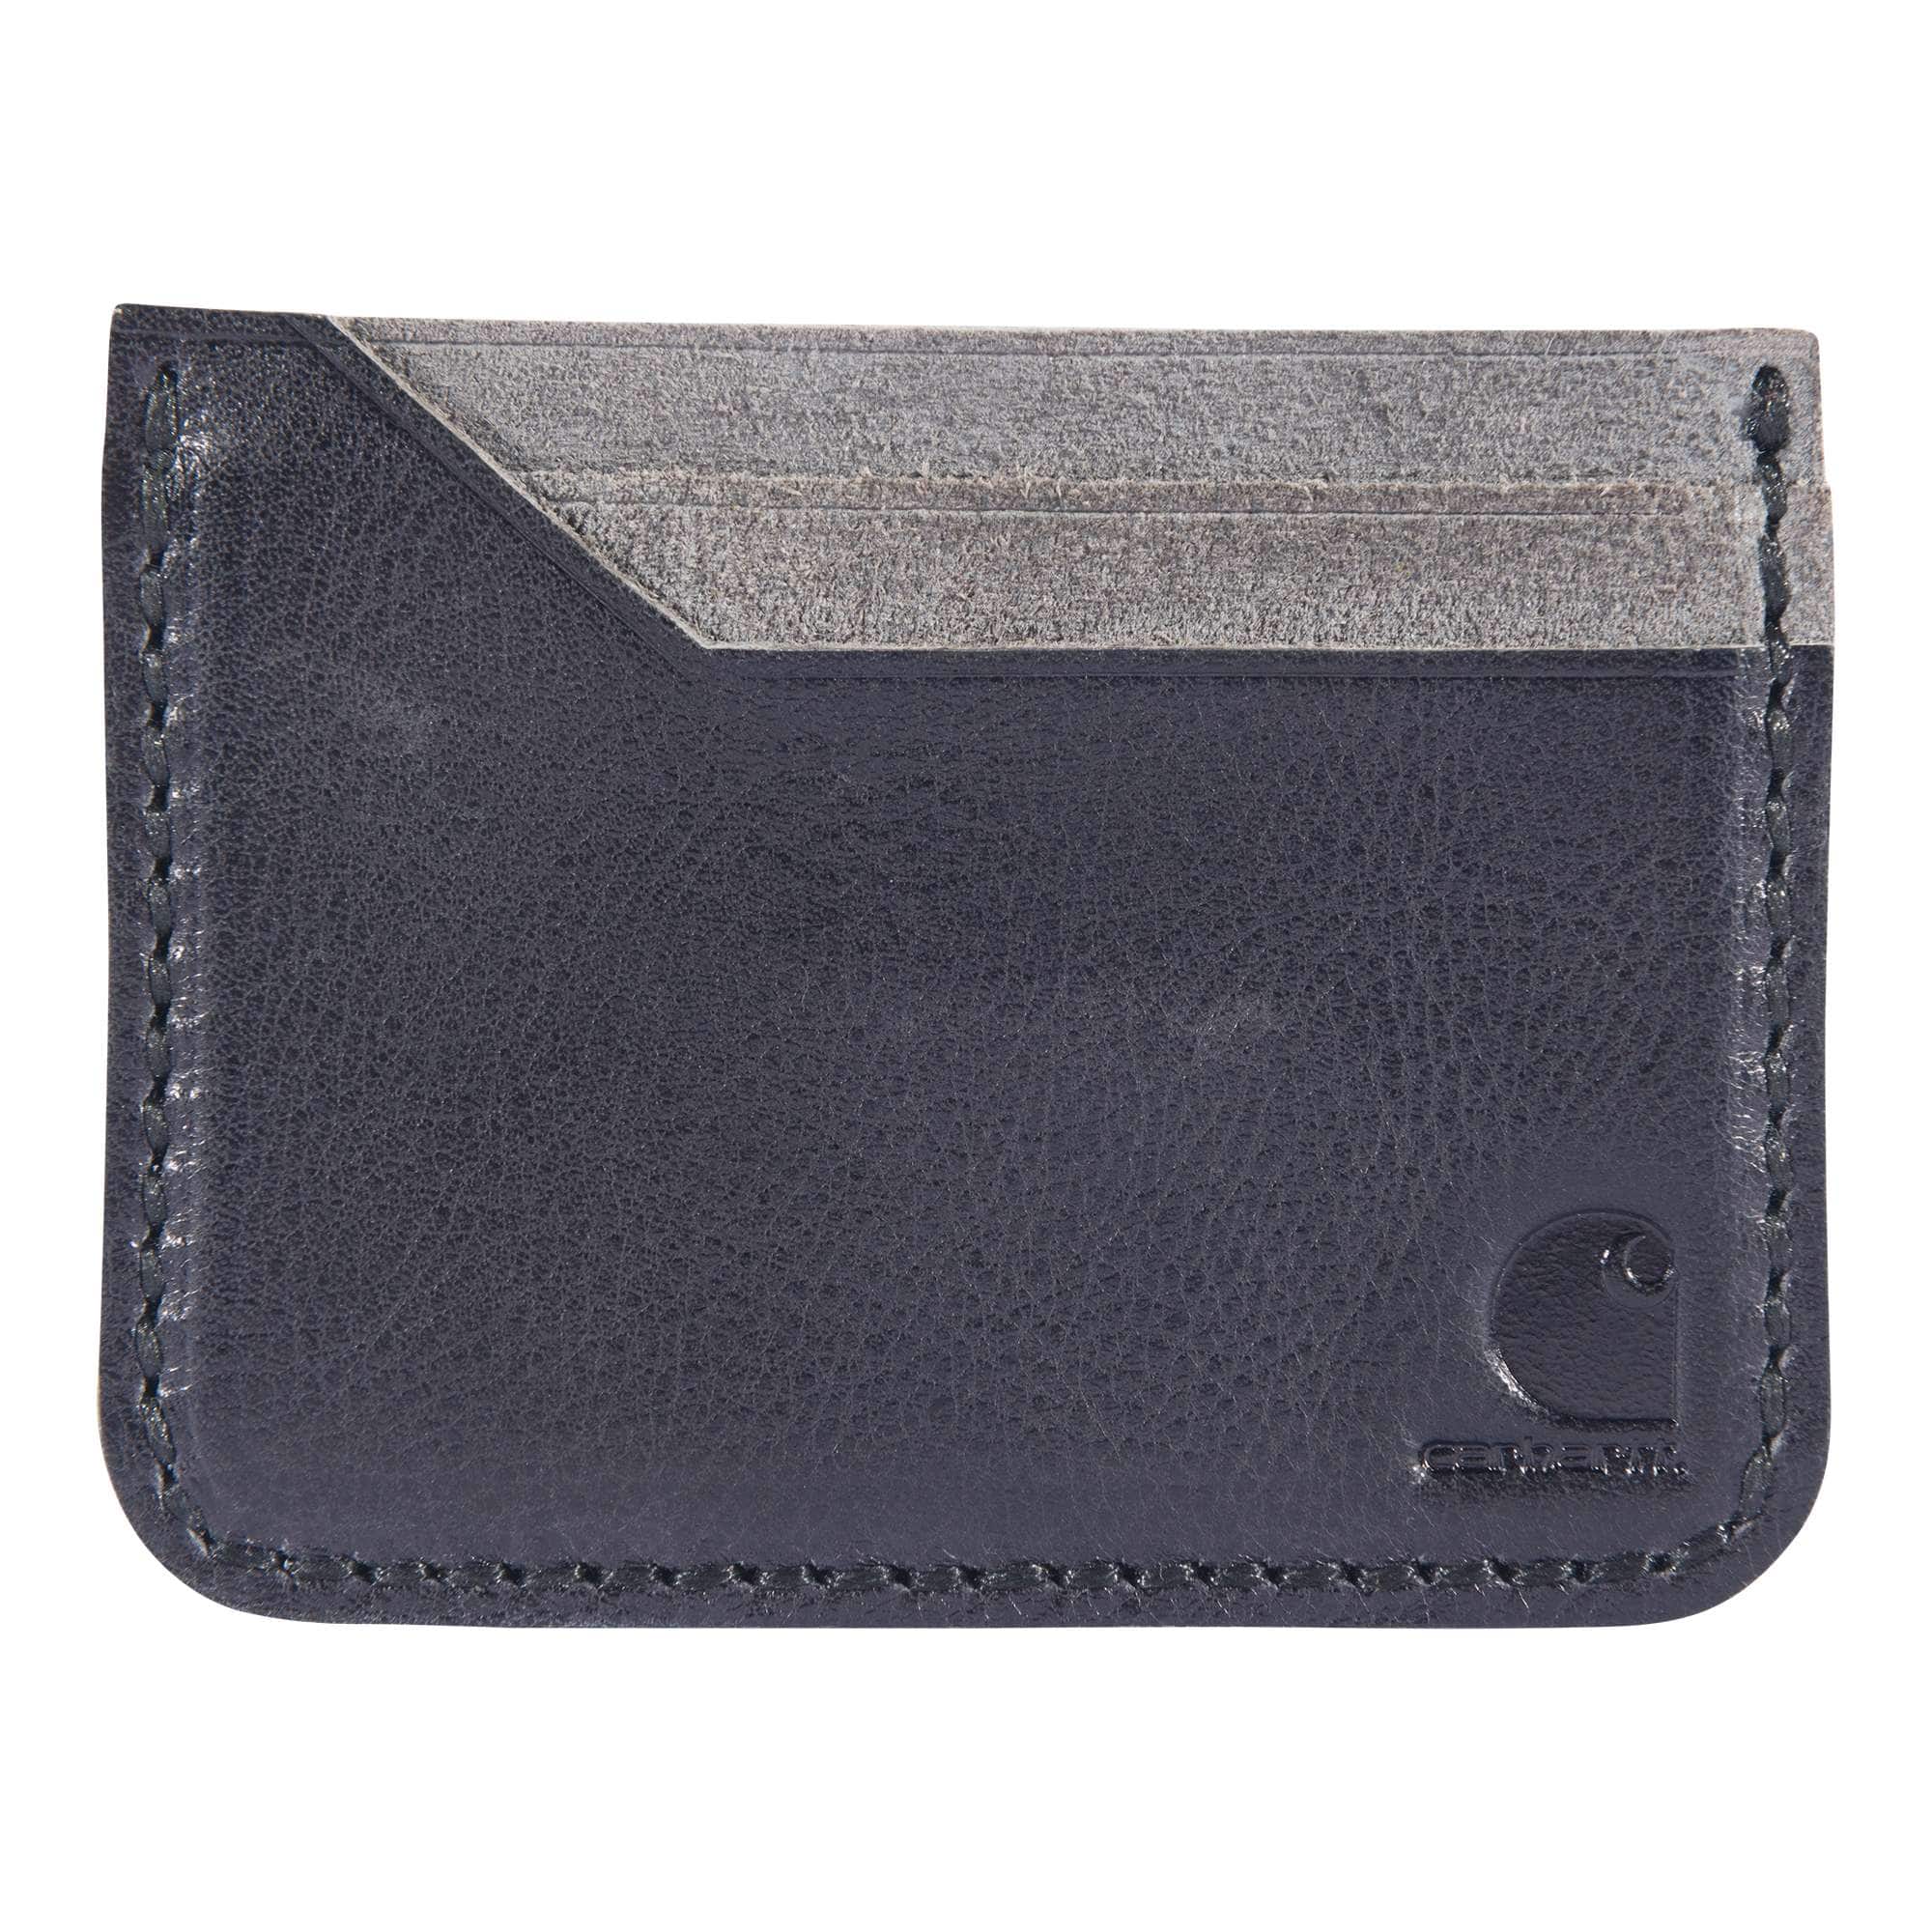 Patina Leather Front Pocket Wallet